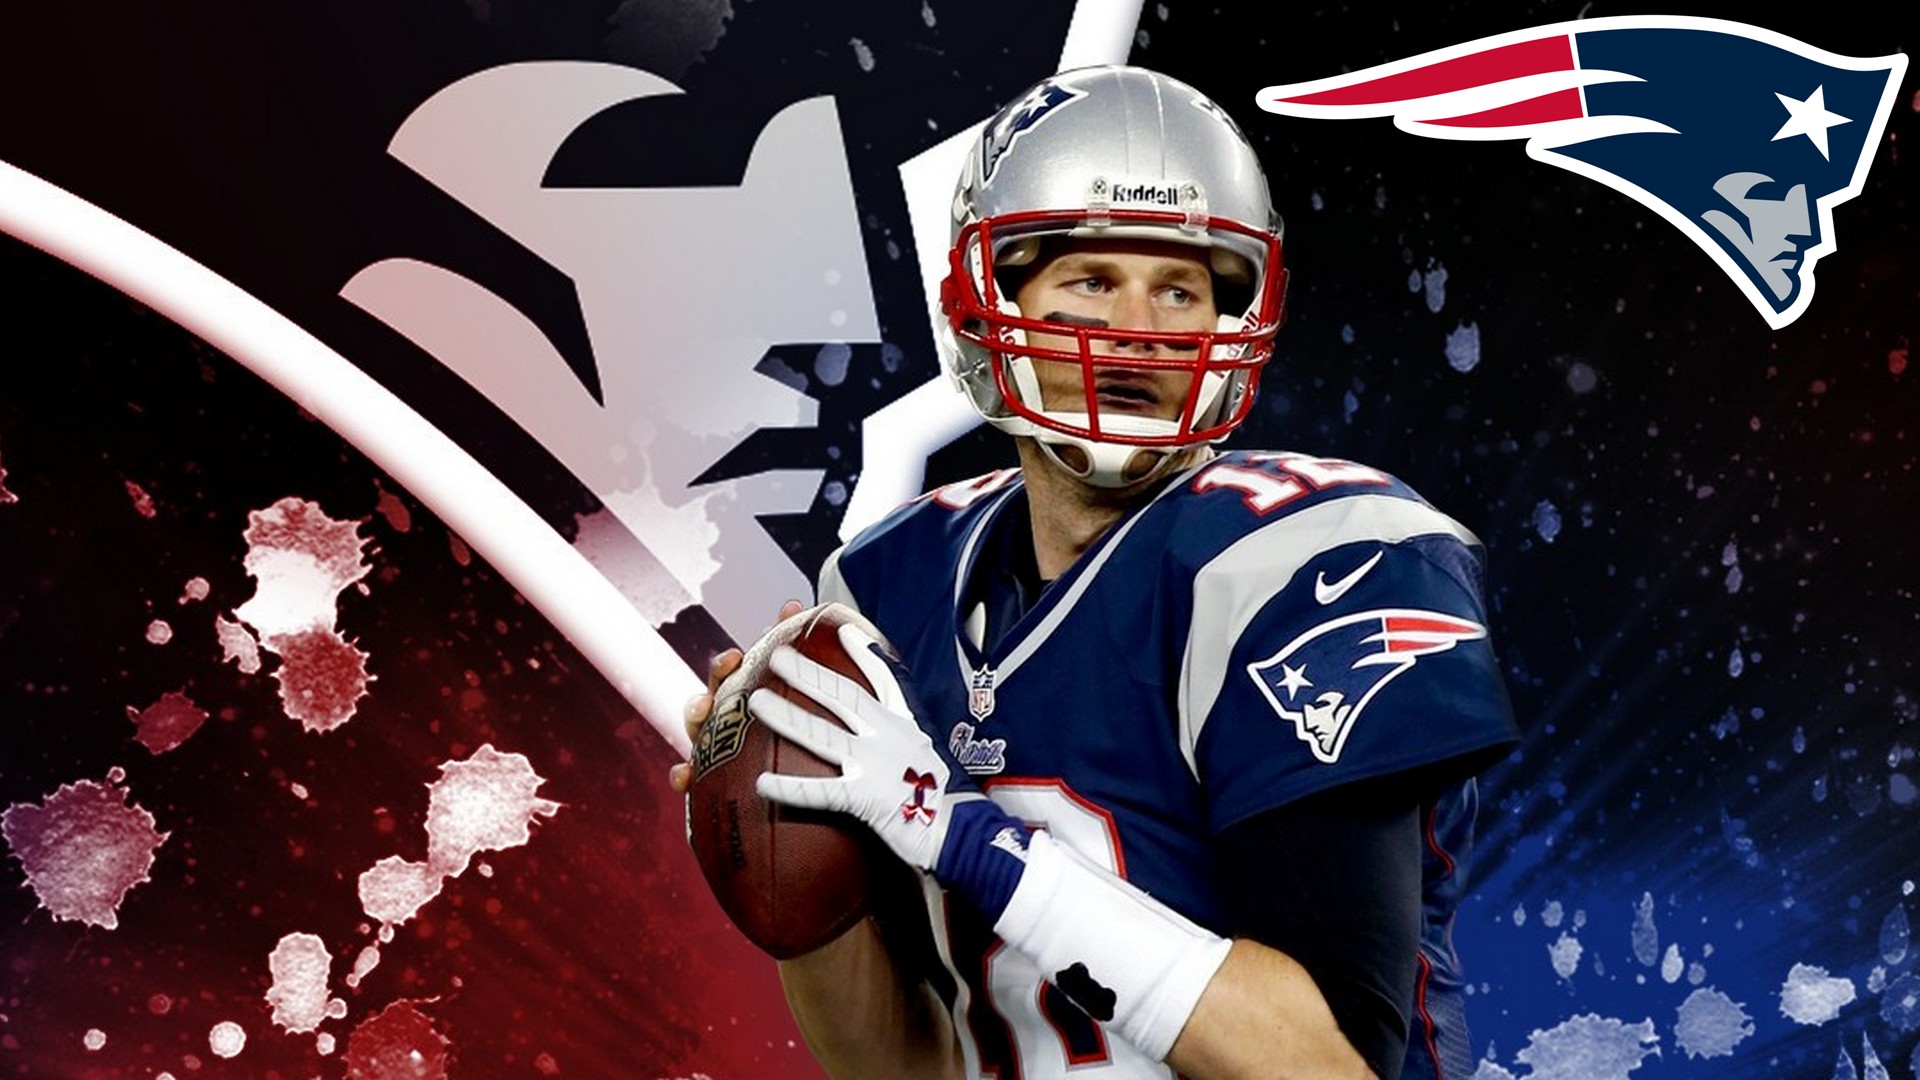 Tom Brady Goat HD Wallpapers with resolution 1920x1080 pixel. You can make this wallpaper for your Mac or Windows Desktop Background, iPhone, Android or Tablet and another Smartphone device